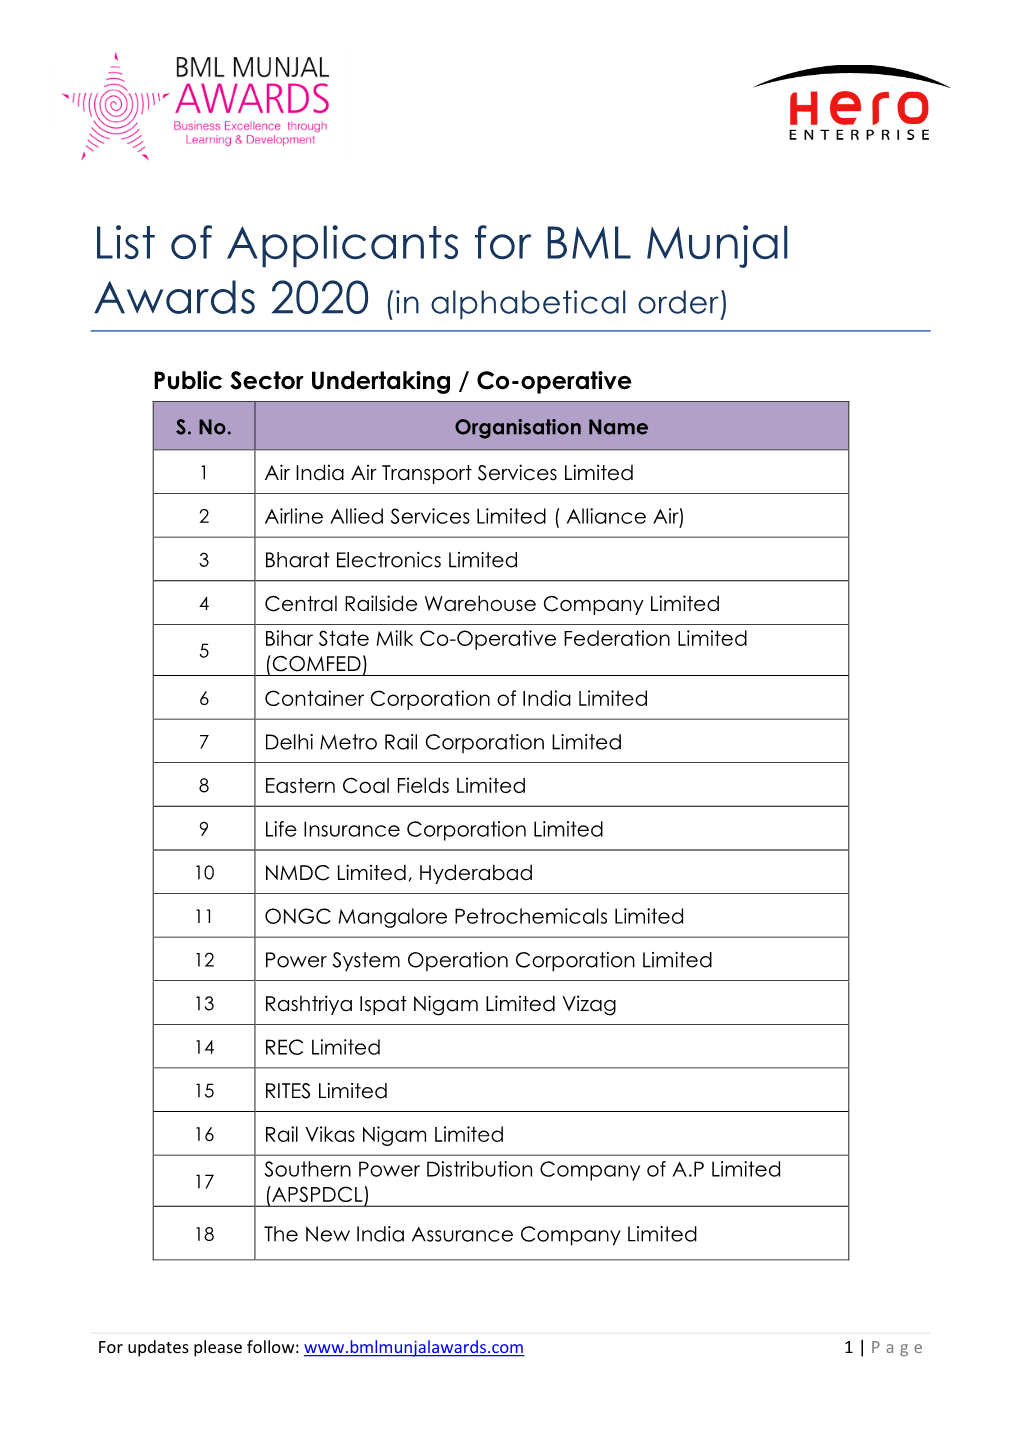 List of Applicants for BML Munjal Awards 2020 (In Alphabetical Order)